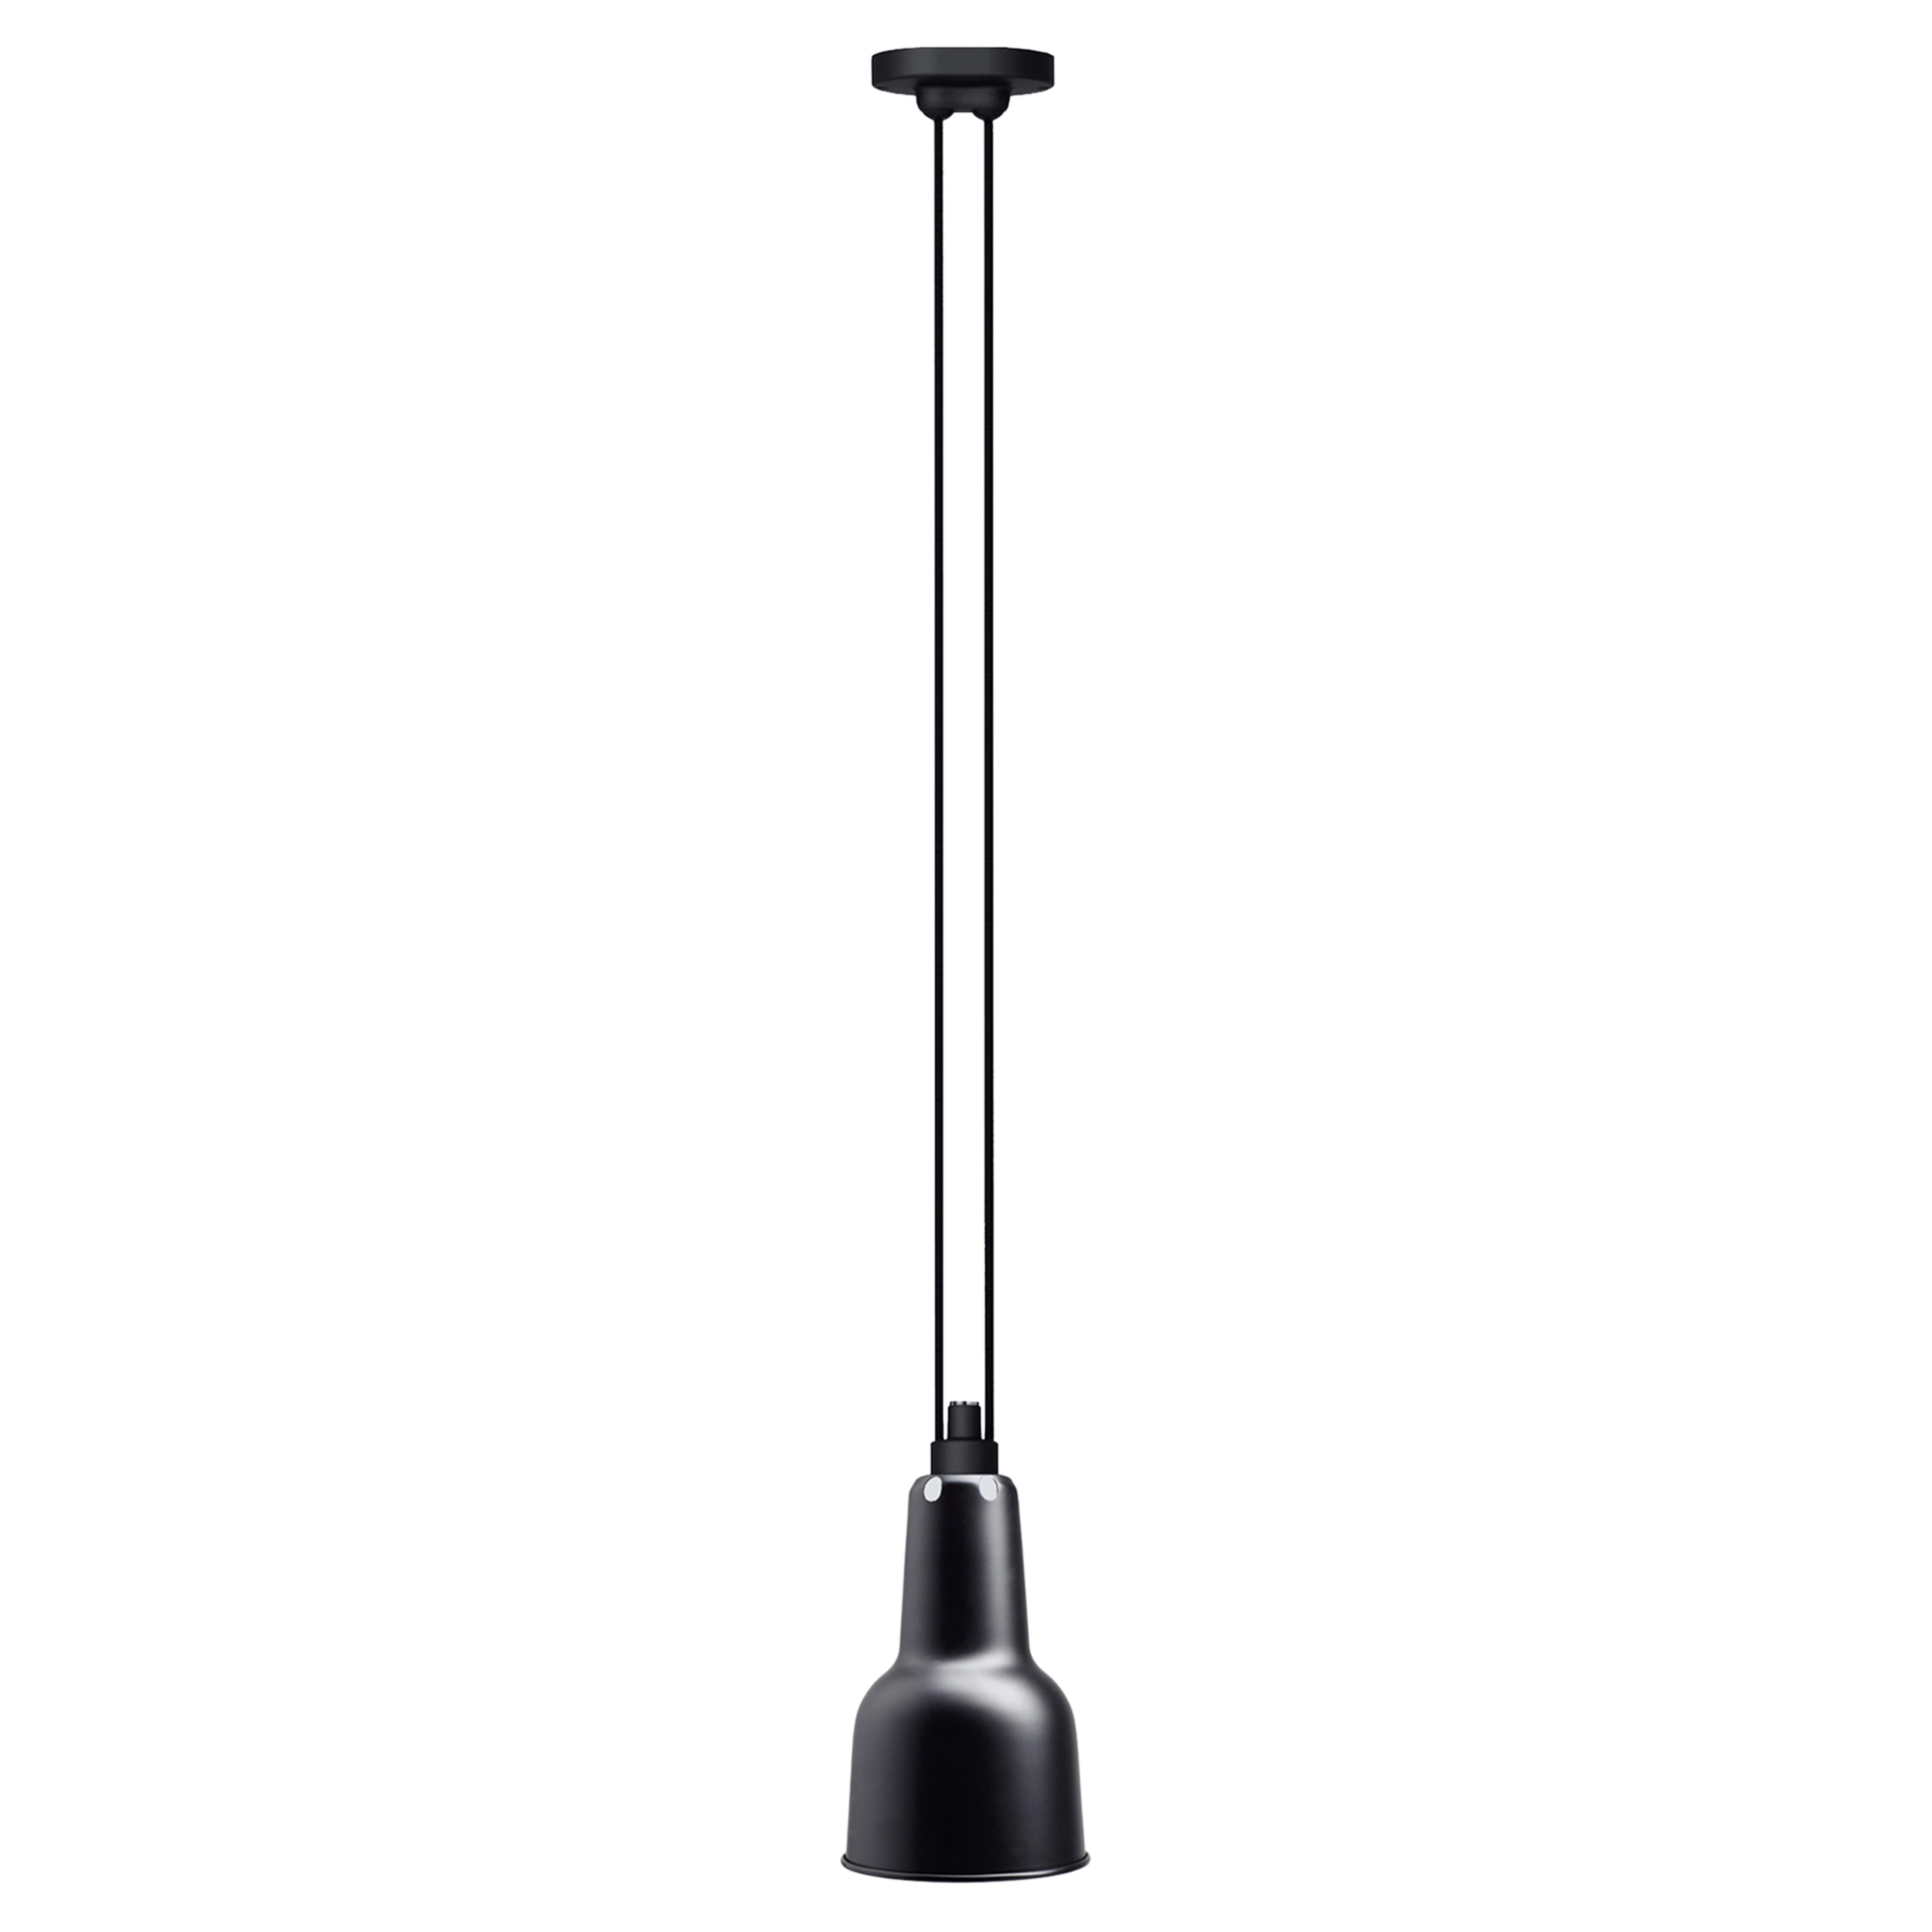 DCW Editions Les Acrobates N°322 Oculist Pendant Lamp in Black Shade For Sale